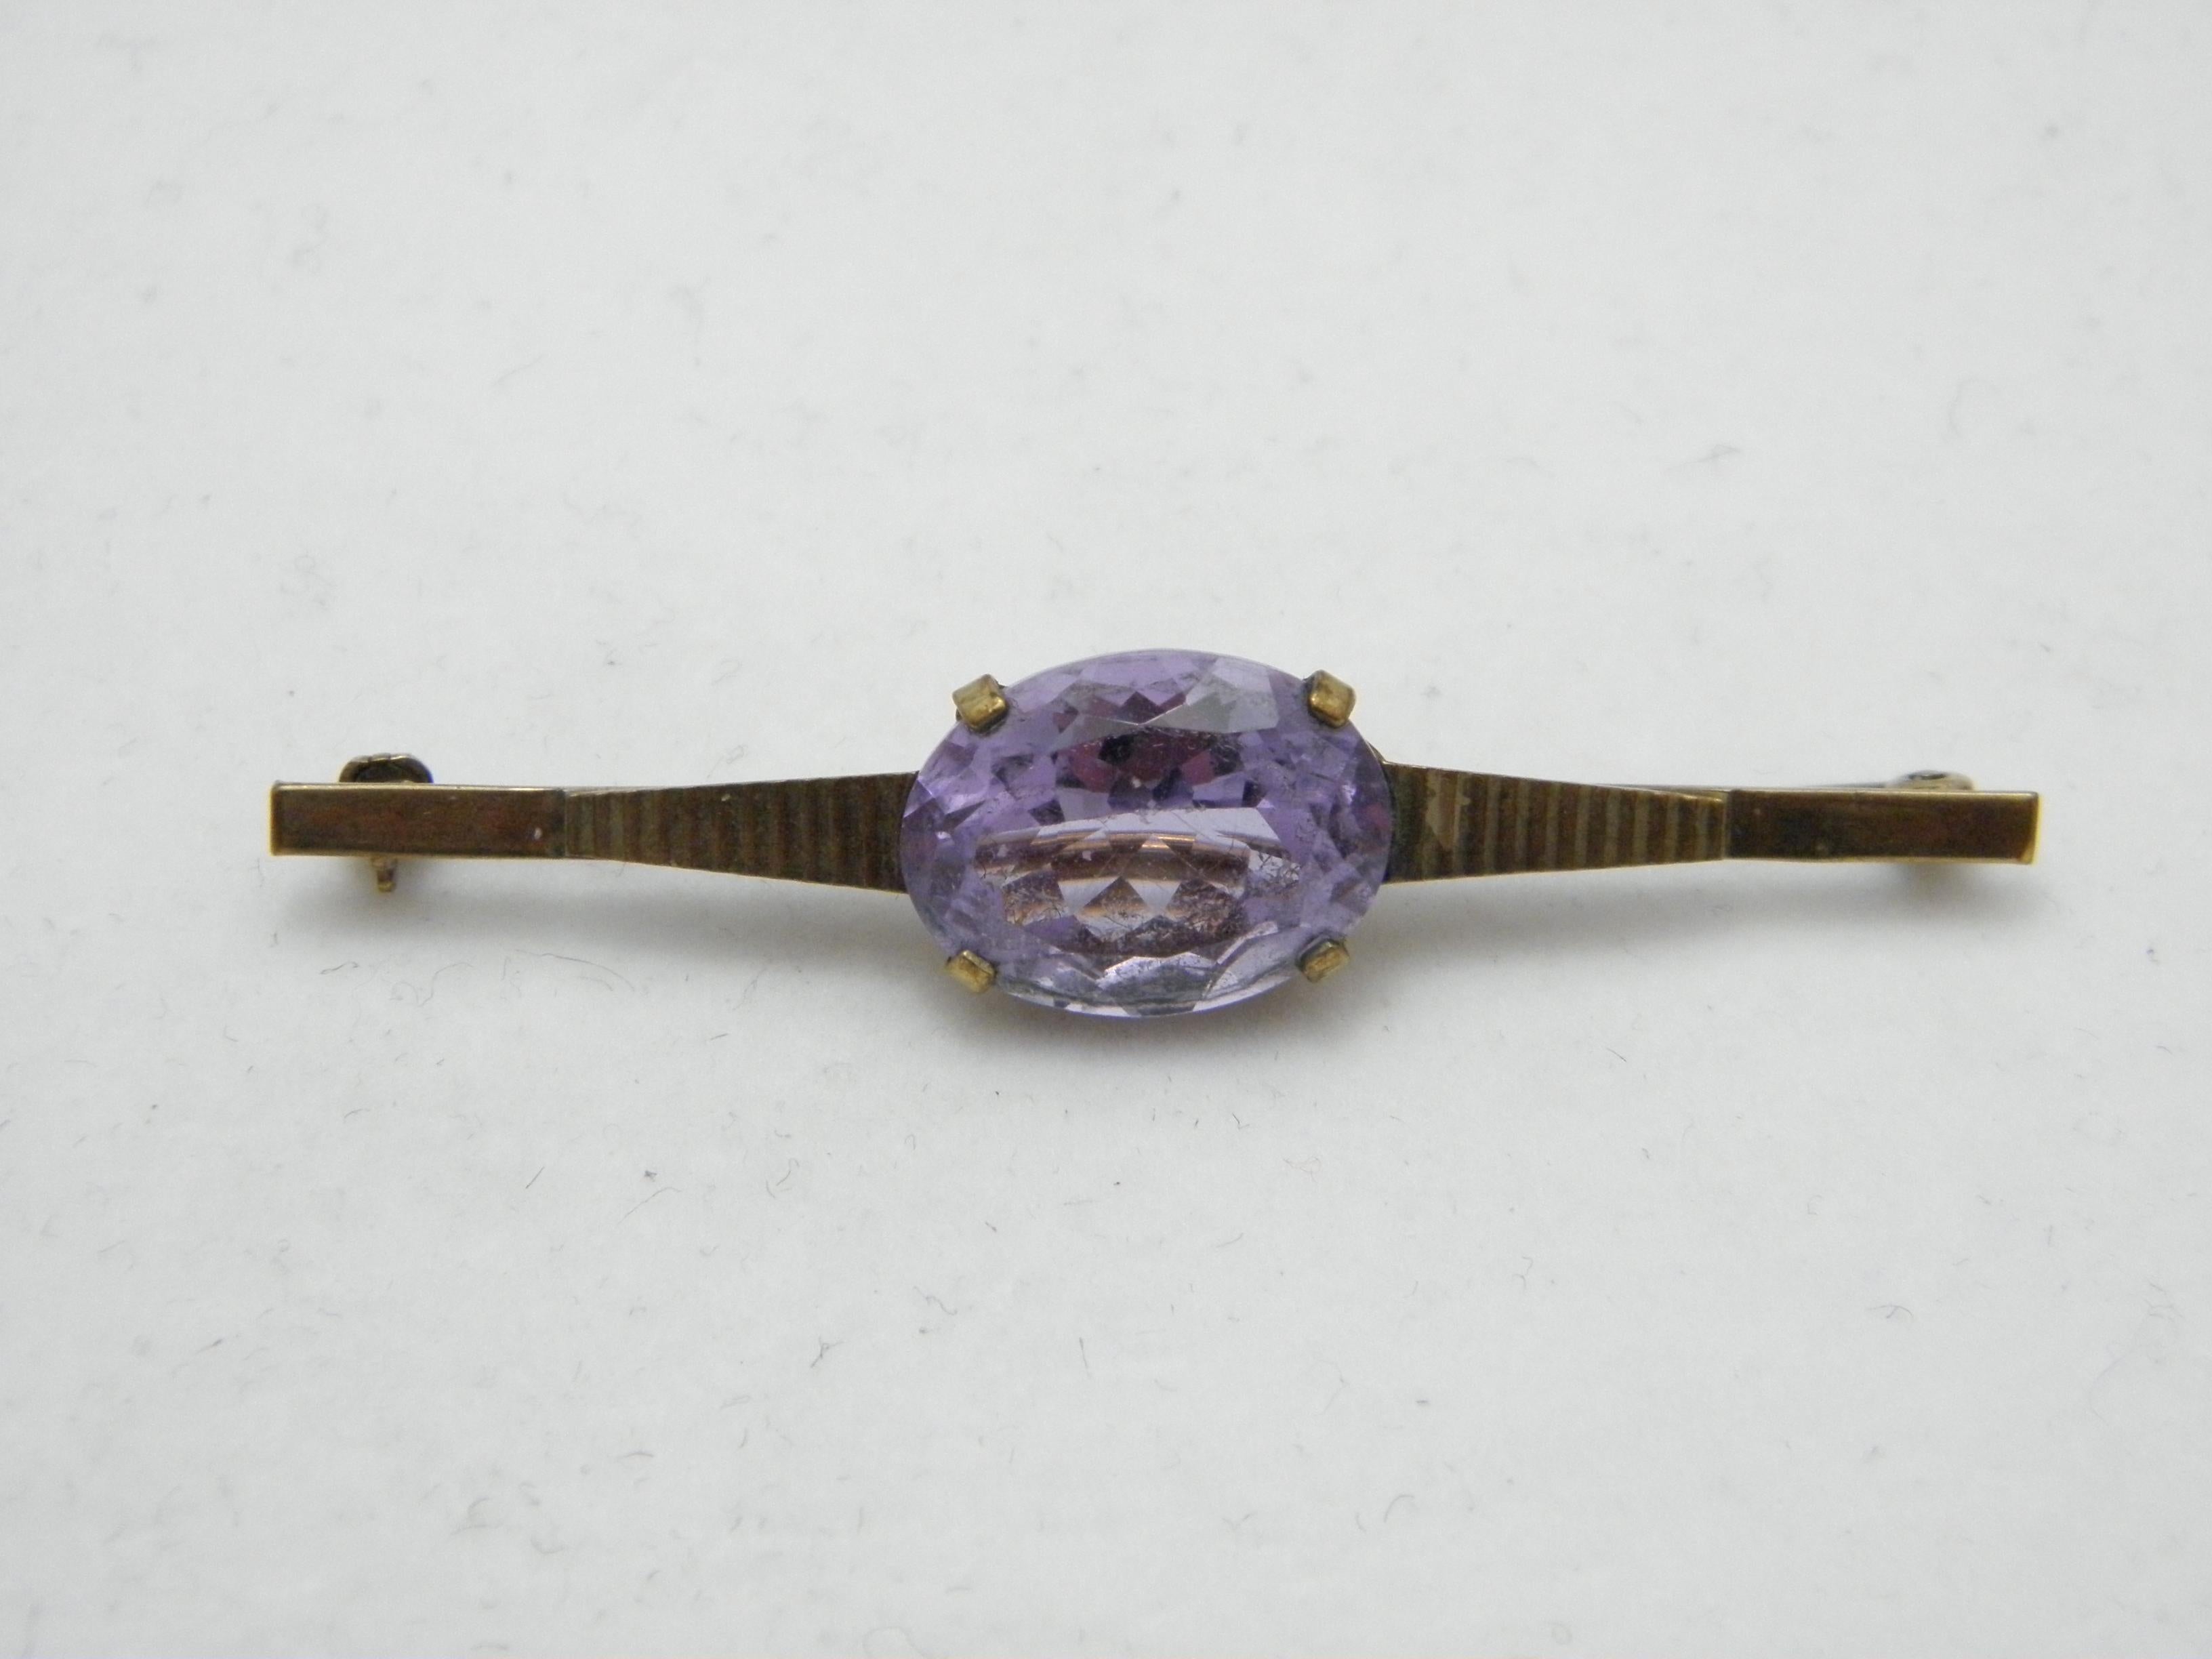 If you have landed on this page then you have an eye for beauty.

On offer is this gorgeous

8CT HEAVY GOLD ROSE DE FRANCE AMETHYST ART DECO BAR BROOCH

DETAILS
Material: 8ct (333/000) Solid Heavy Yellow Gold
Style: Classic Large Gem Set Art Deco